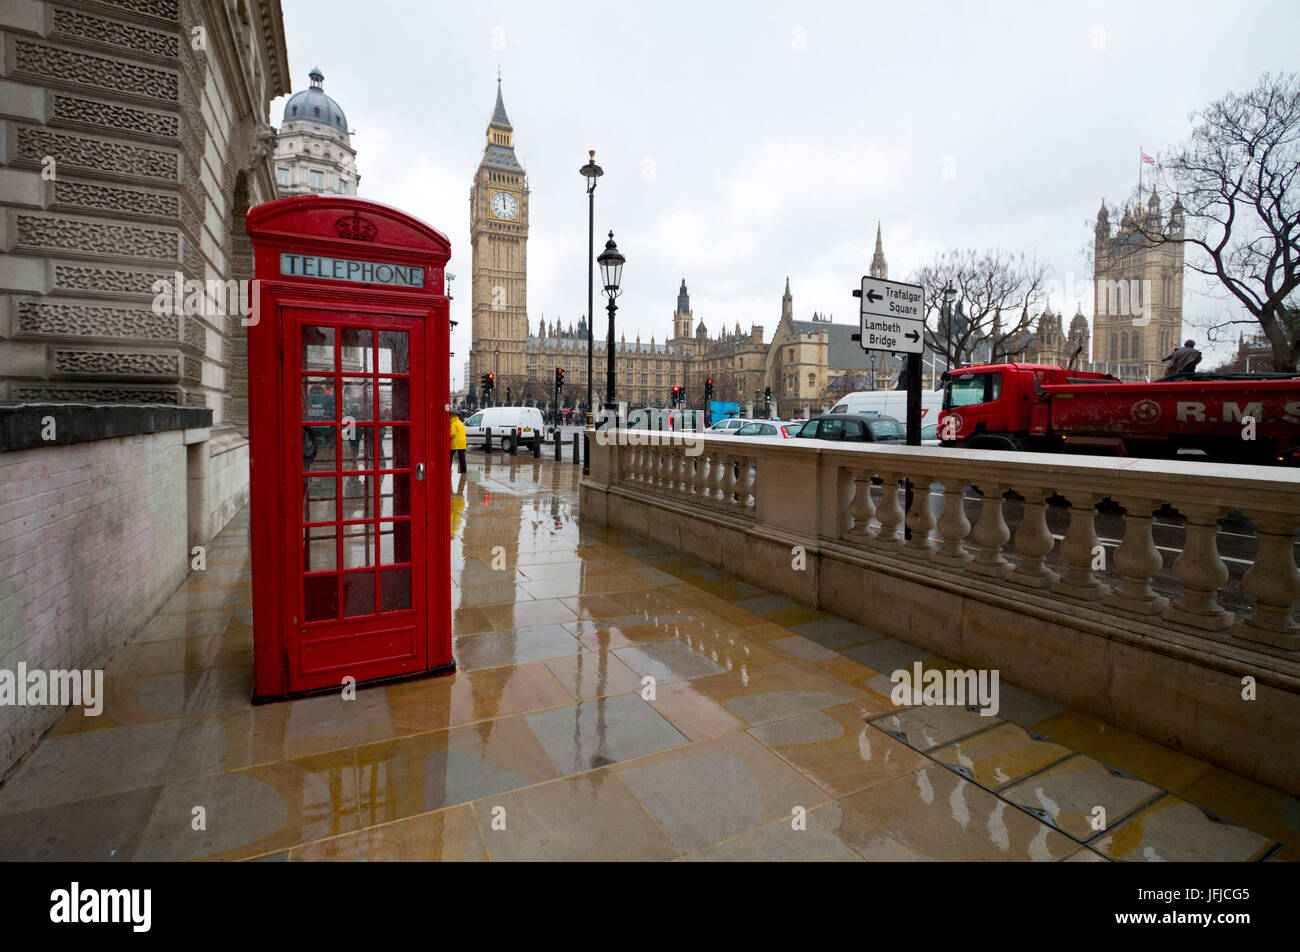 A tipical red phone booth of London with Big Ben in background on a rainy day, London, England Stock Photo